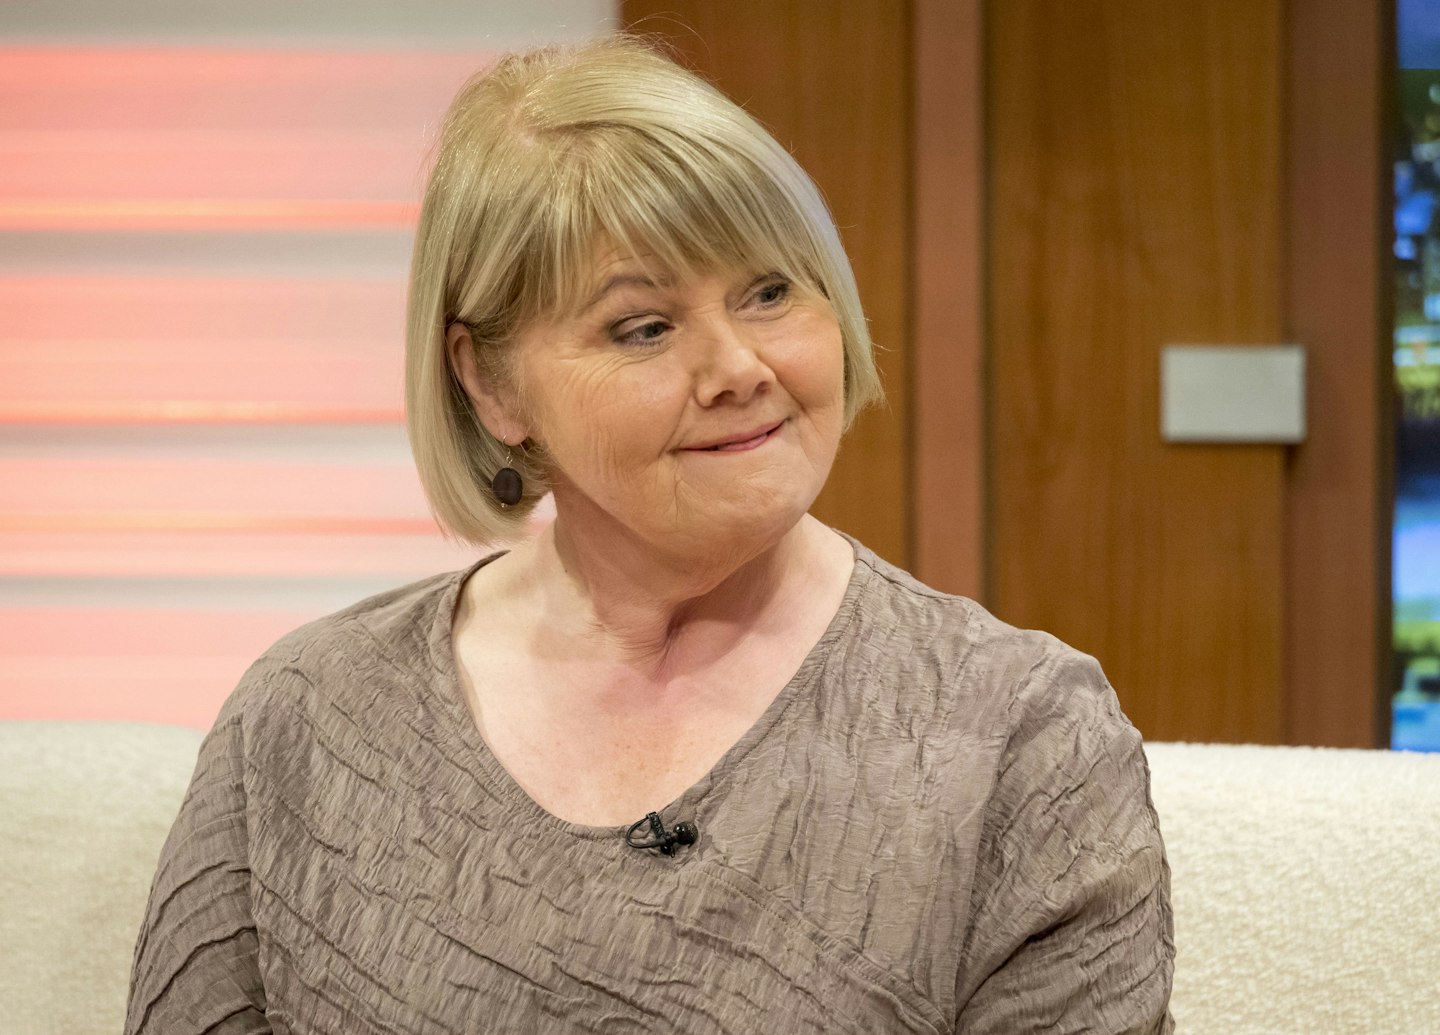 Annette Badland on Good Morning Britain today.